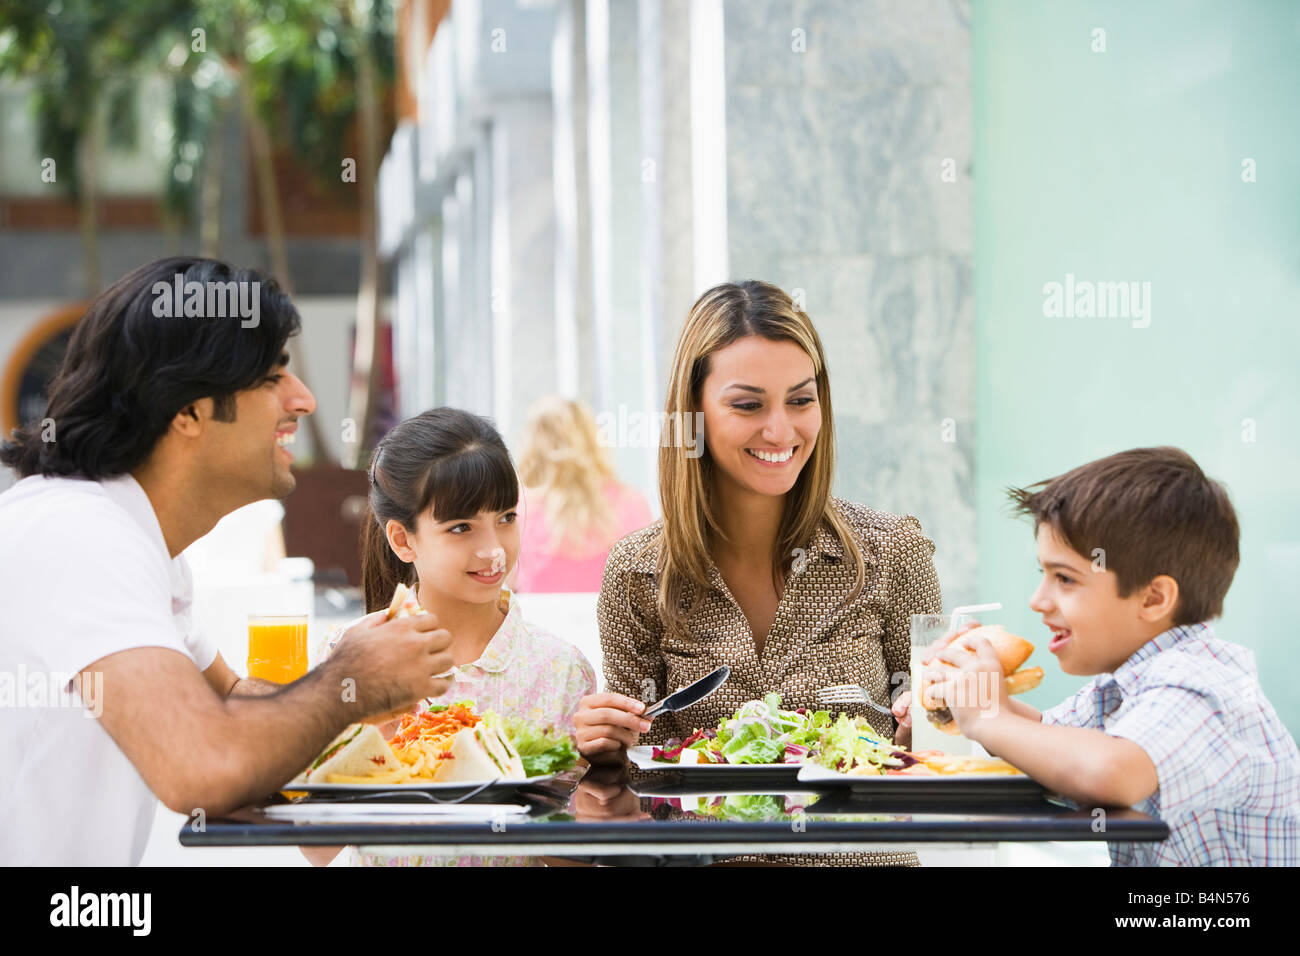 Family at restaurant eating and smiling (selective focus) Stock Photo